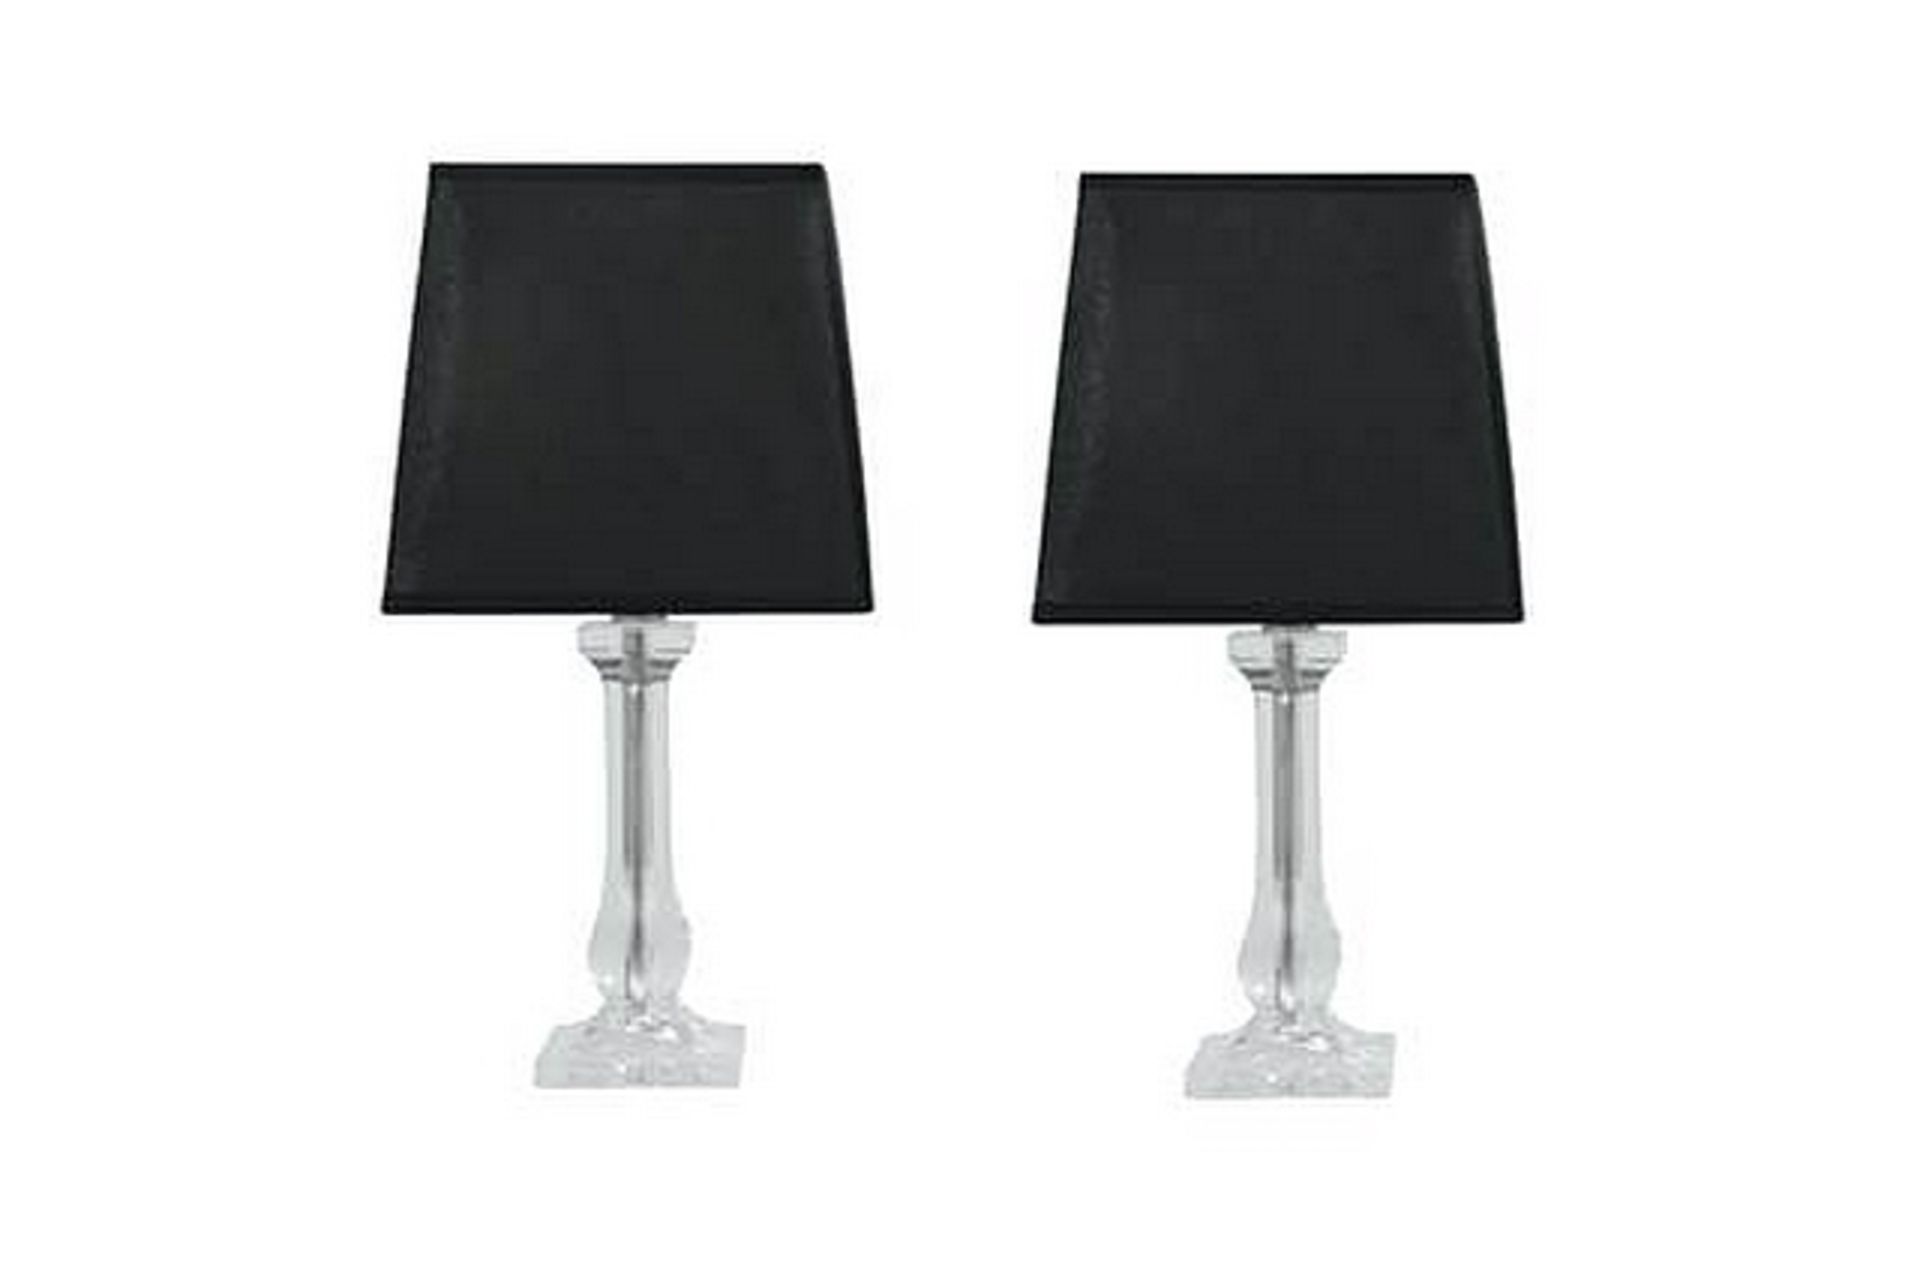 A Pair Table Lamps Classic And Timeless Design Clear Acrylic With Matching Angular Black Fabric